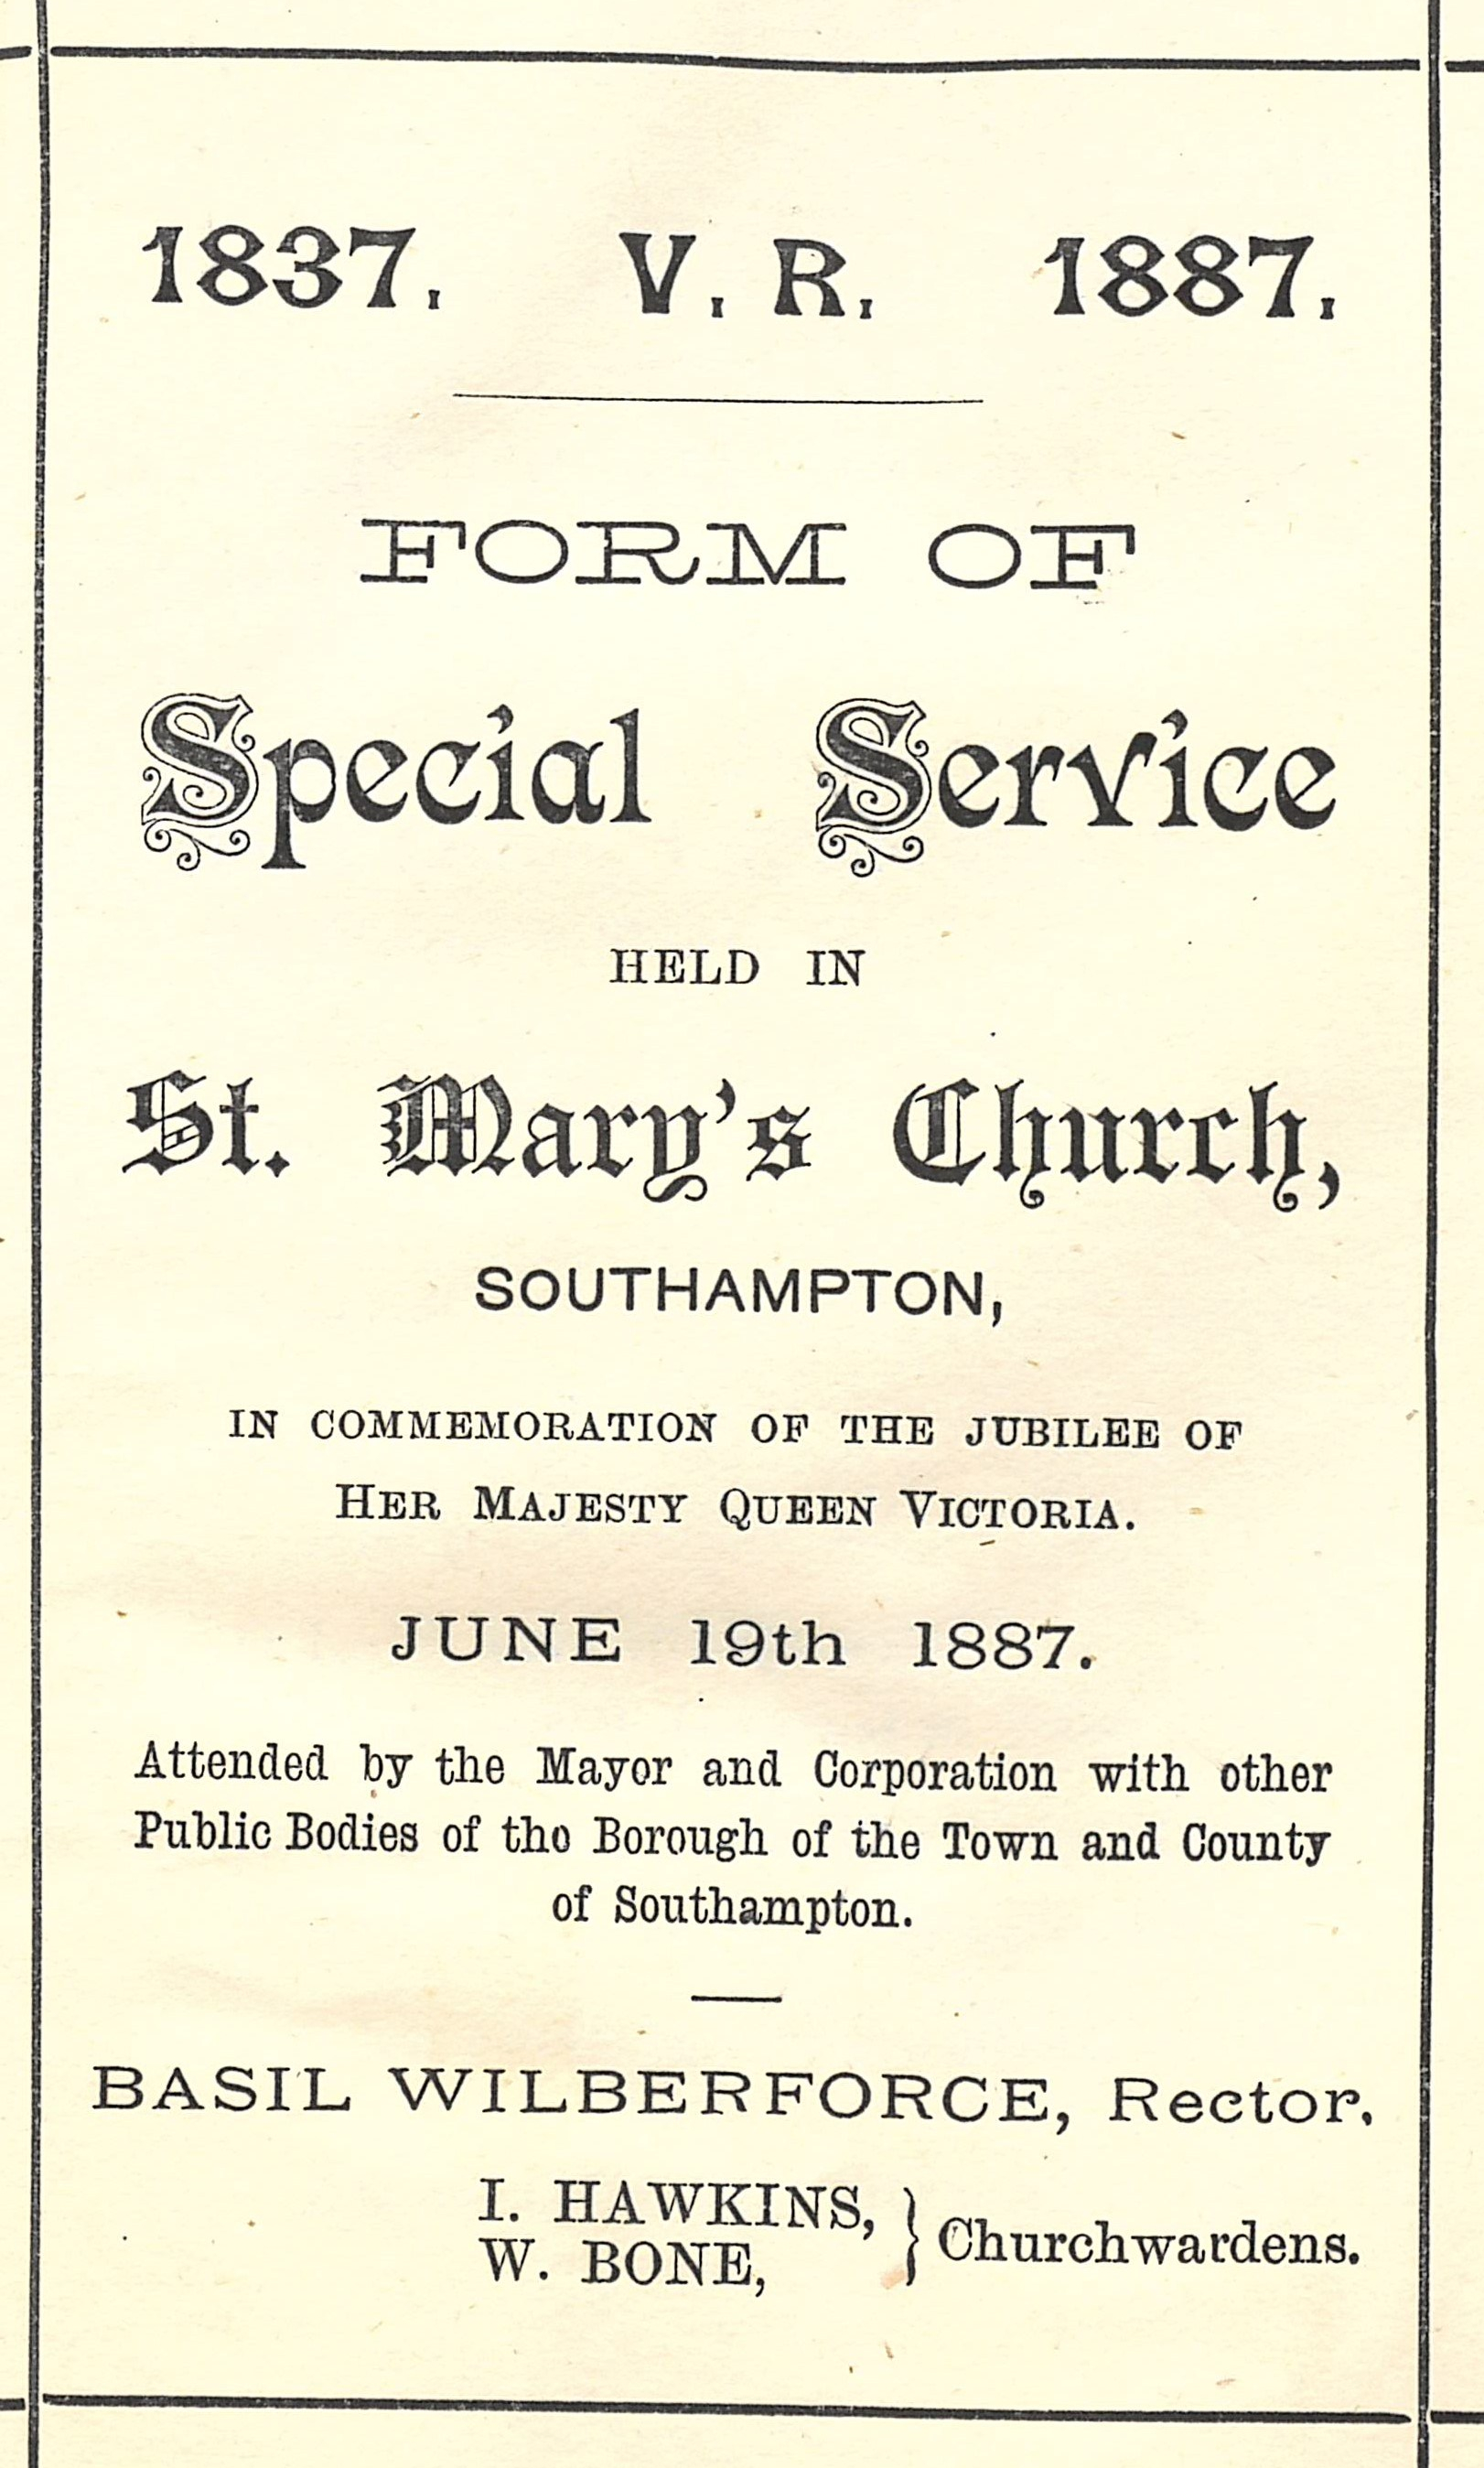 Form of special service held in St. Mary's church, Southampton, in commemoration of the Jubilee of her Majesty Queen Victoria: June 19th 1887 by St Mary’s Church (Southampton) [Cope cabinet SOU 22]